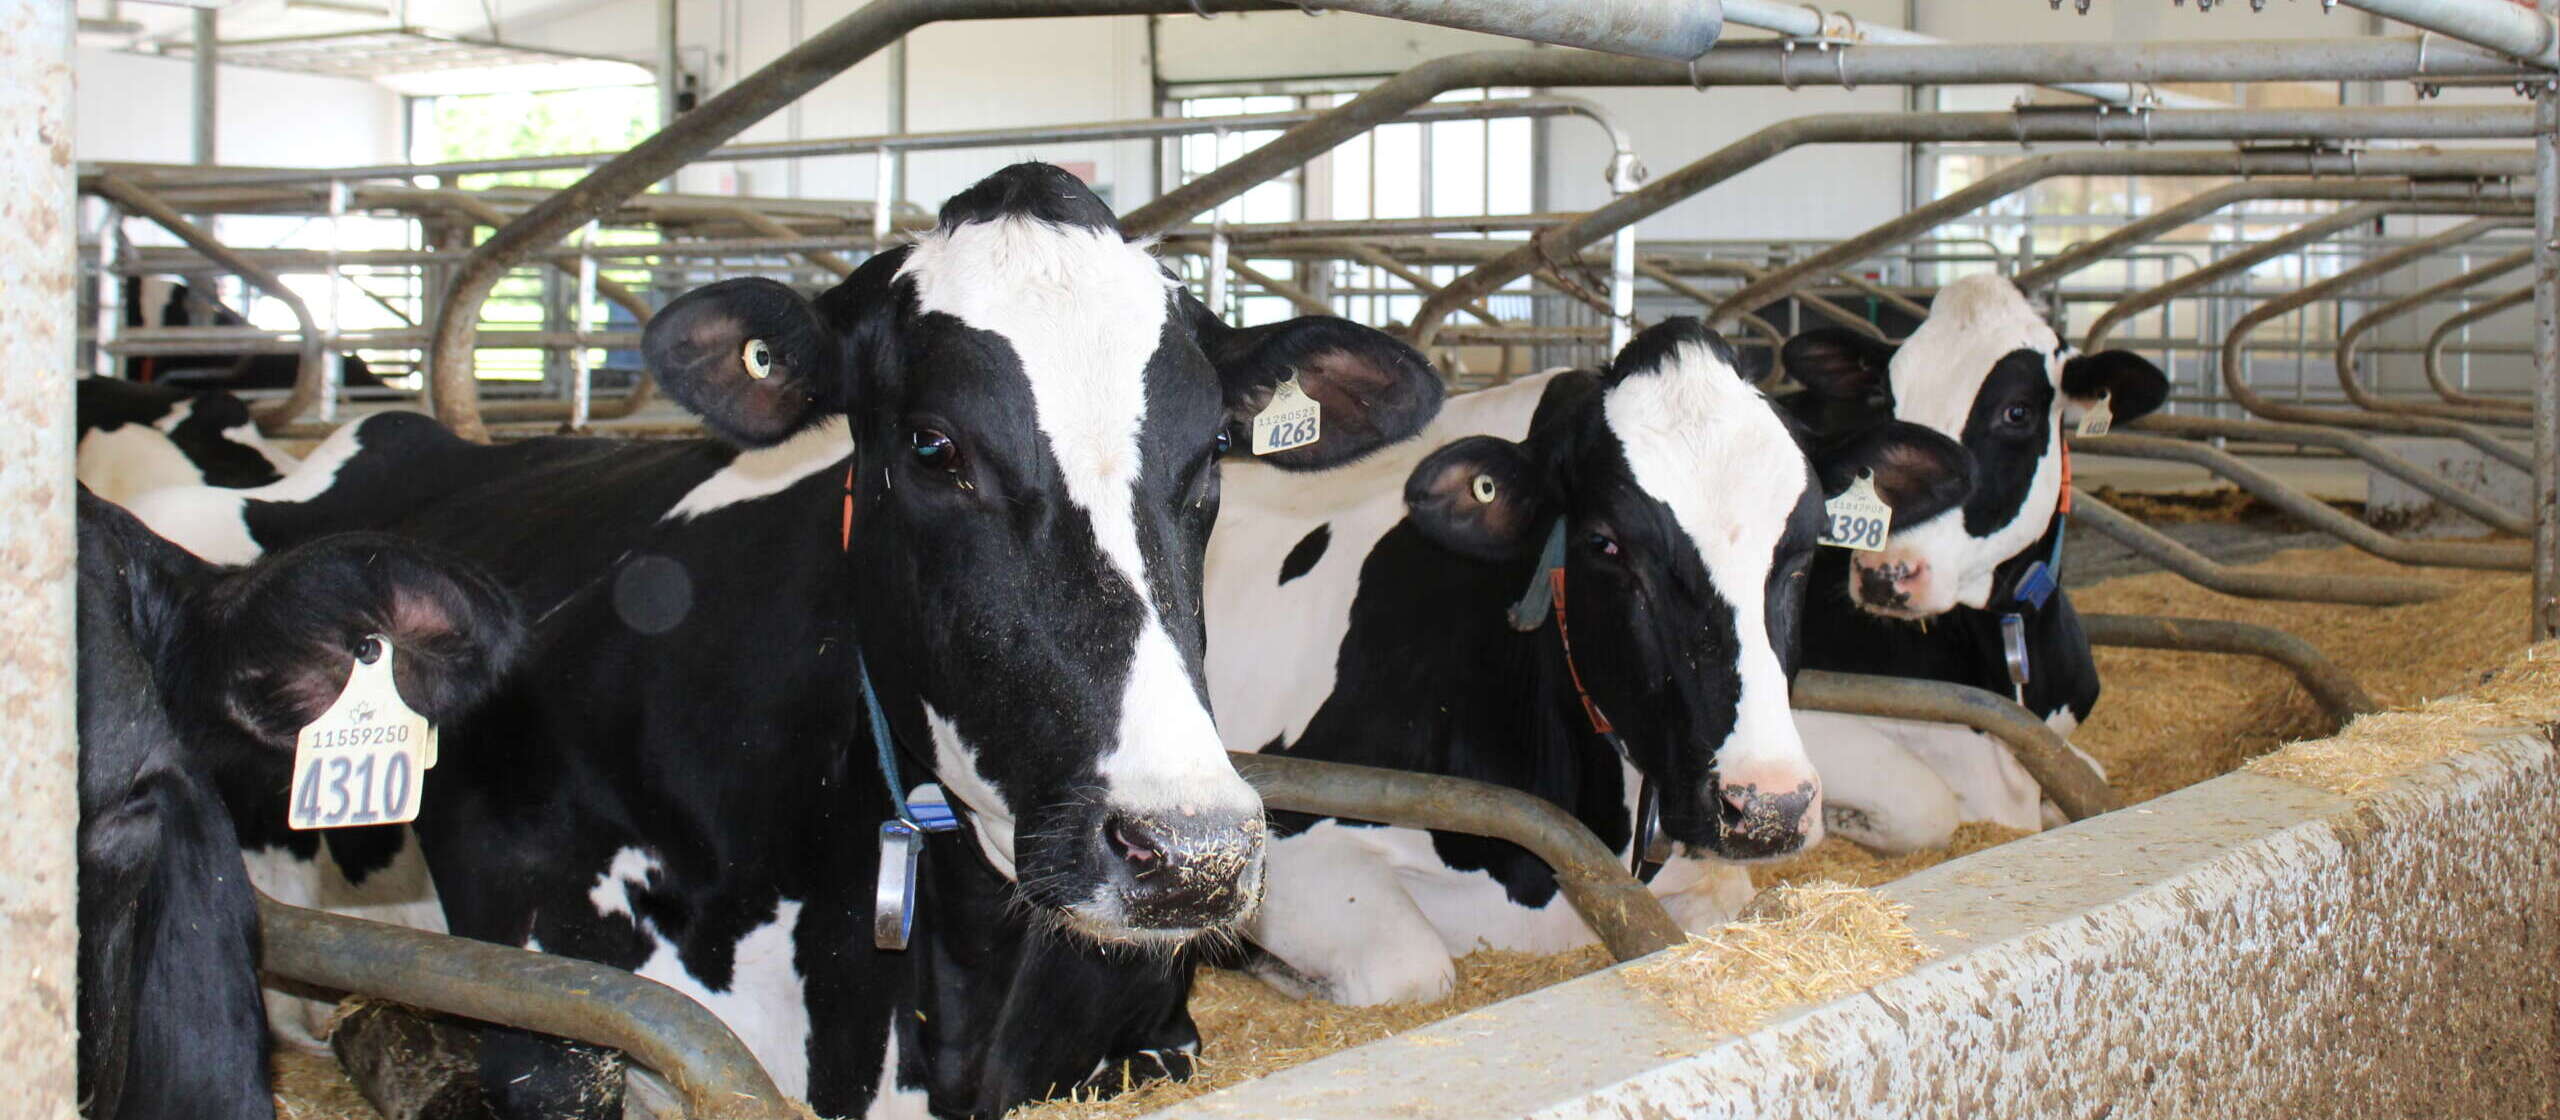 Three dairy cows sitting in their stalls at the Ontario Dairy Research Centre